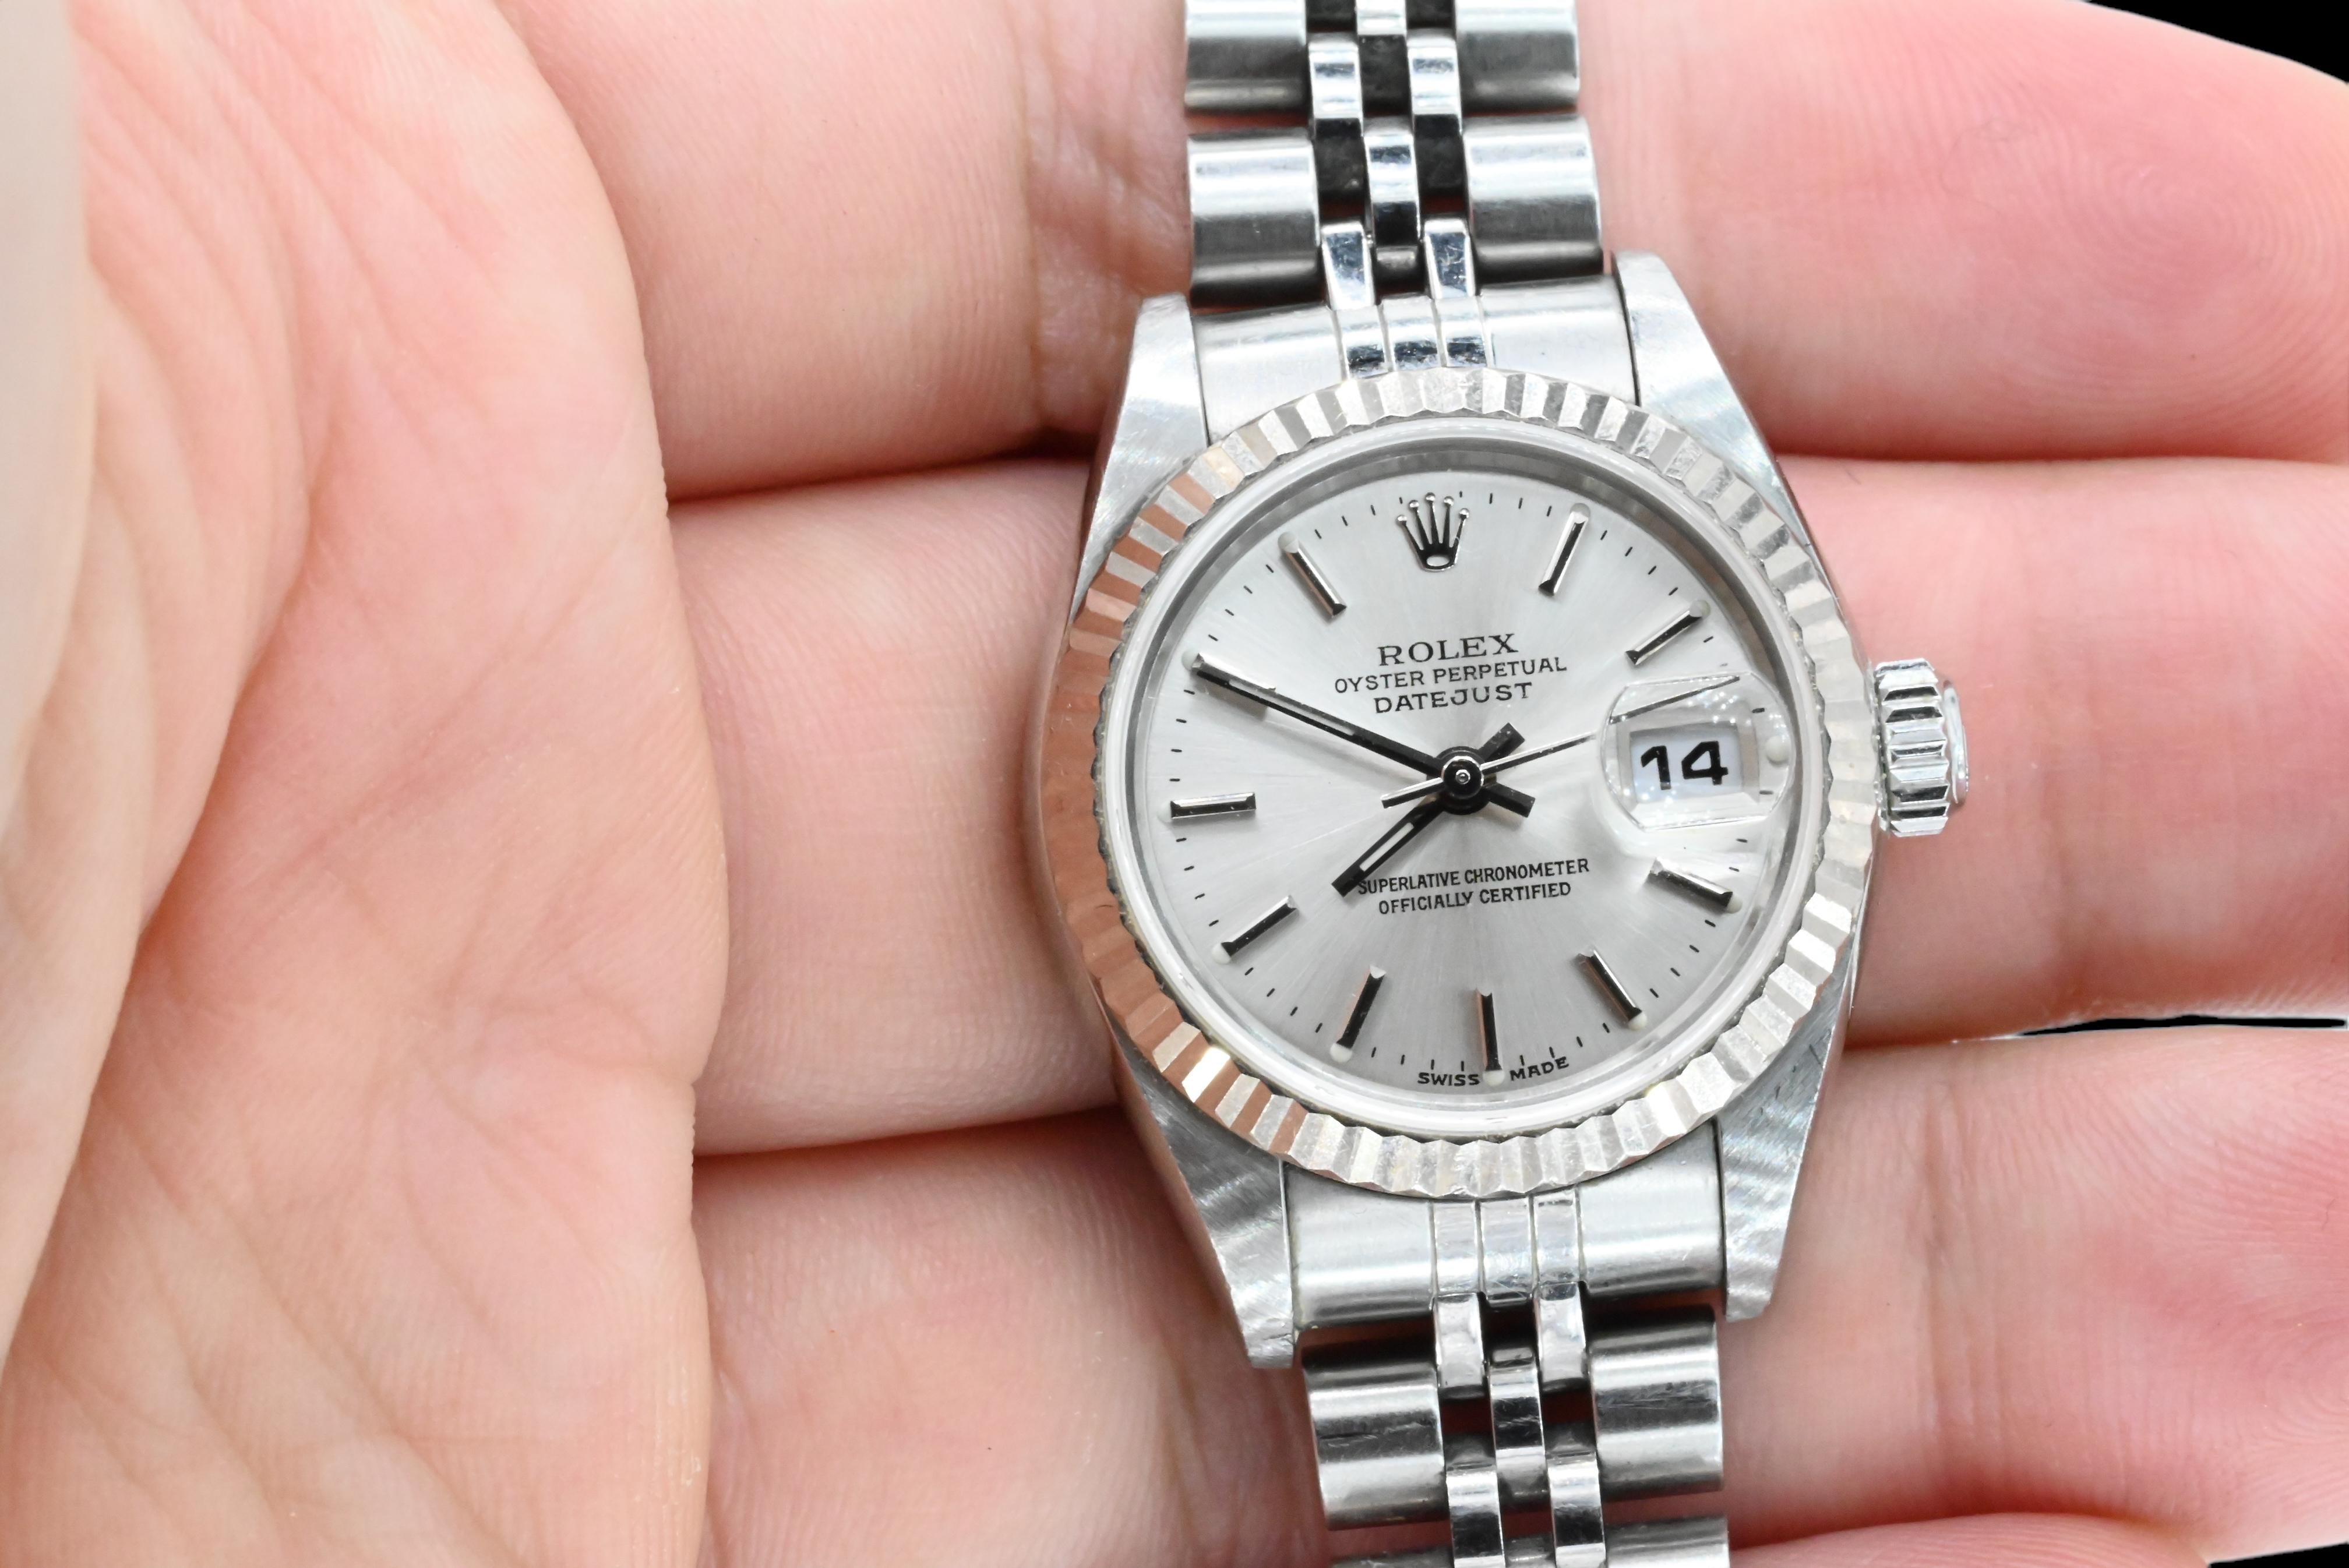 Ready to go Ladies Rolex Wristwatch Model 79174
Made From Stainless Steel, The Best Quality of Course
Preowned Comes with Original Box & Papers 
Has Extra Link To Add Size
Automatic Winding 
18K White Gold Bezel 26 MM